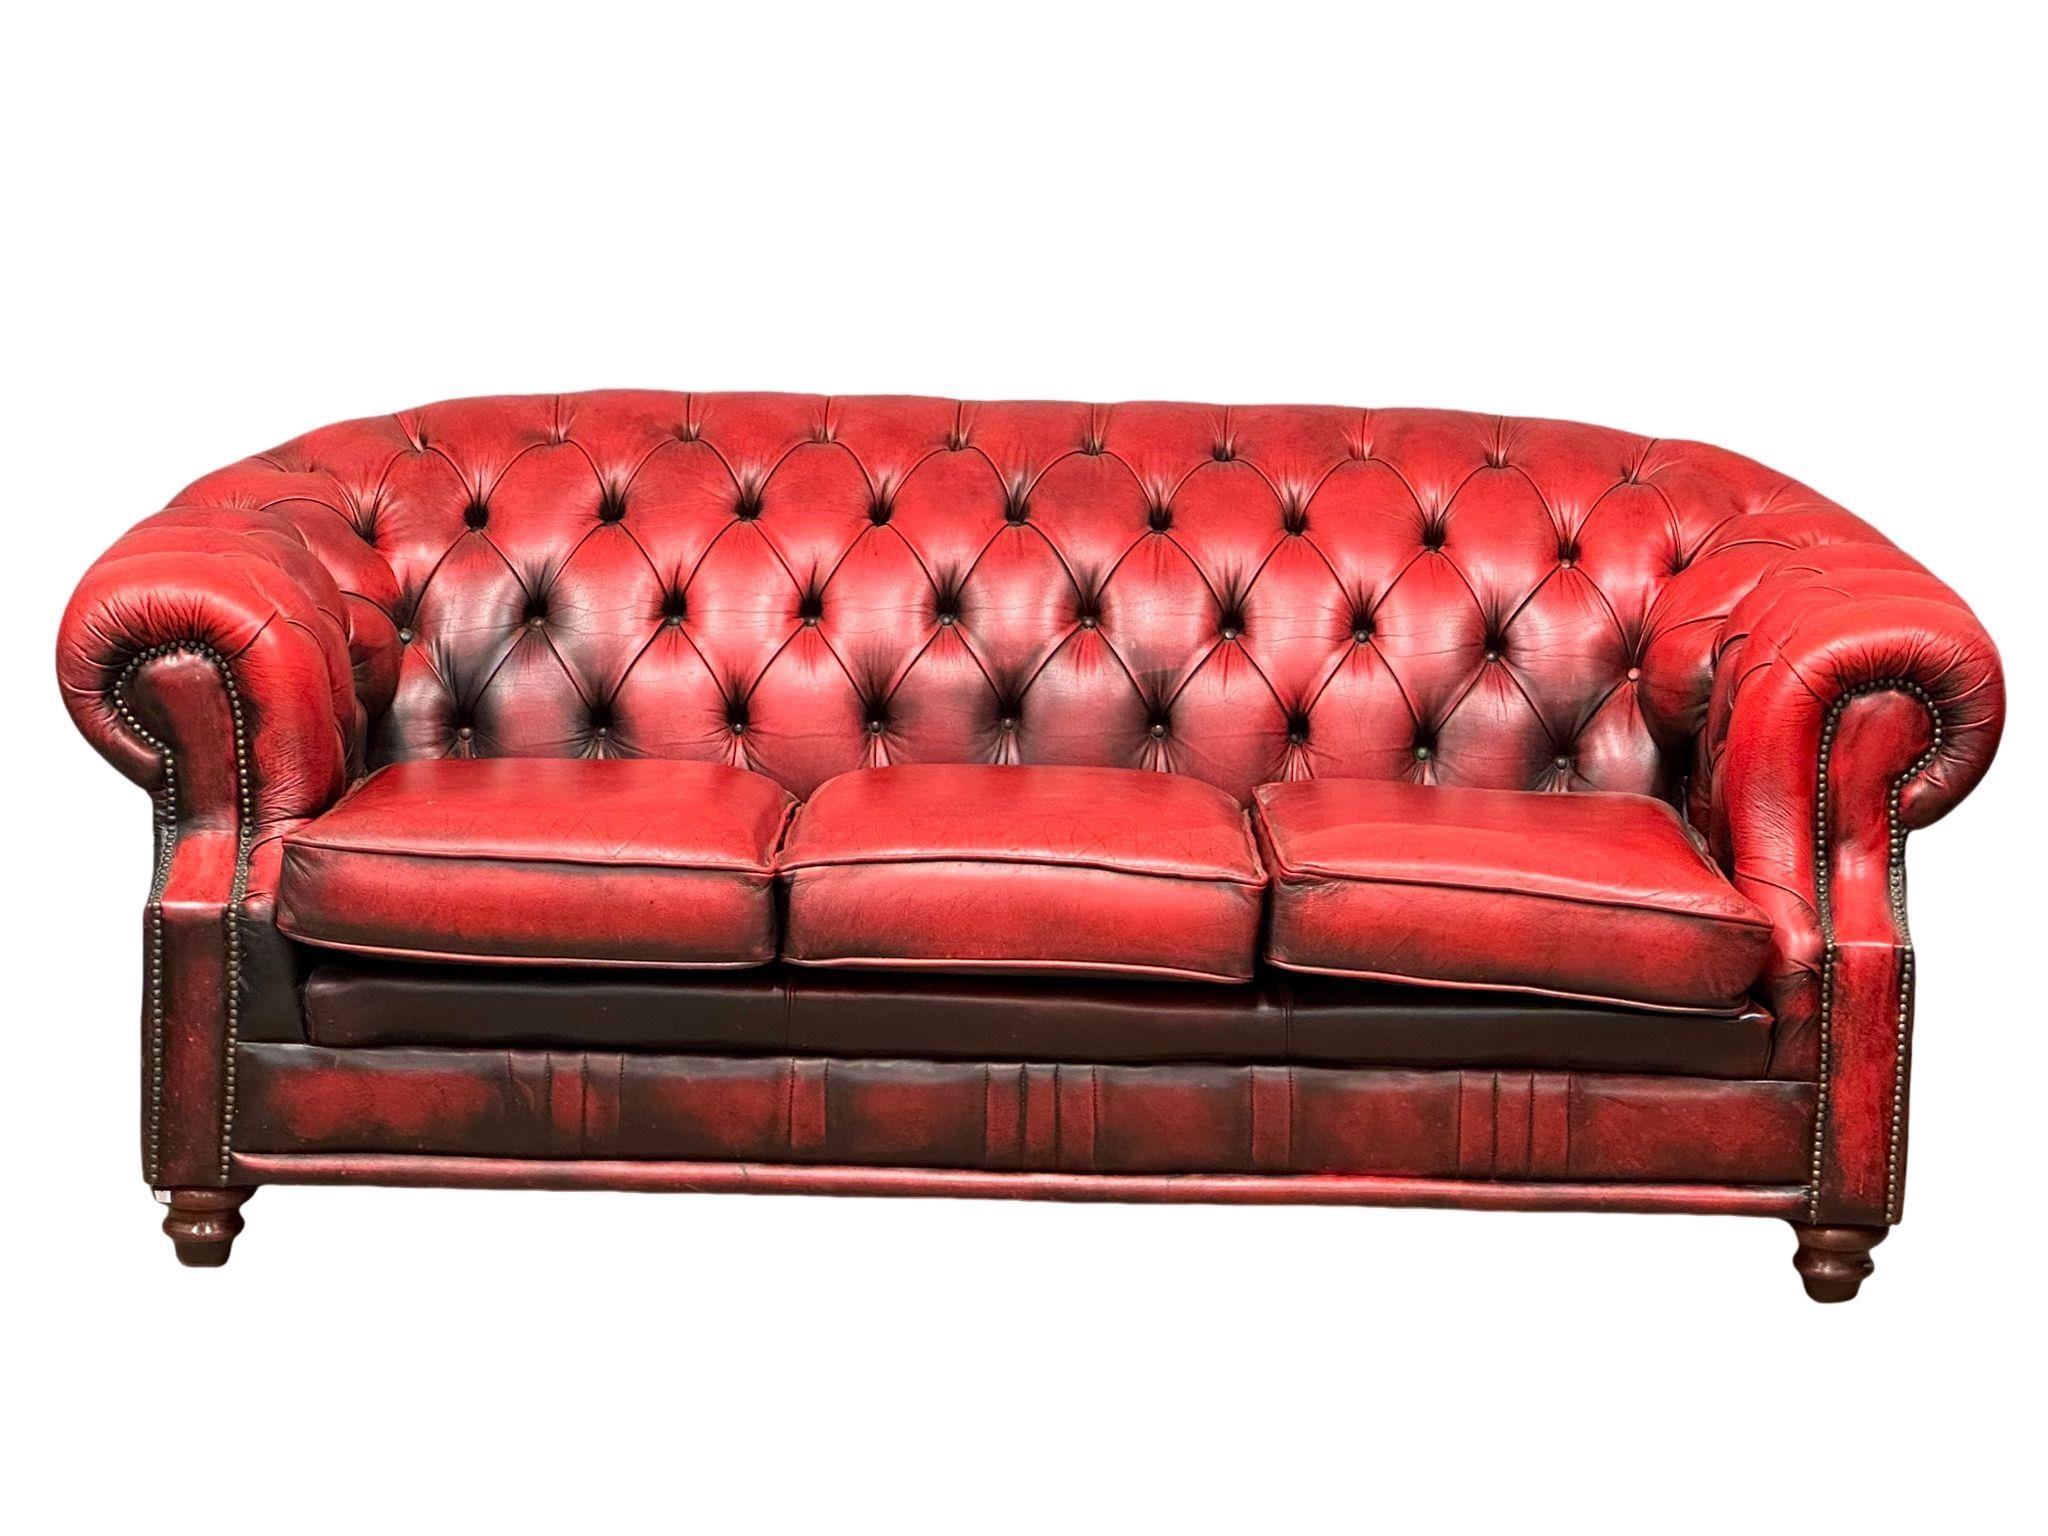 A deep buttoned ox-blood leather Victorian style 3 seater sofa. 207cm